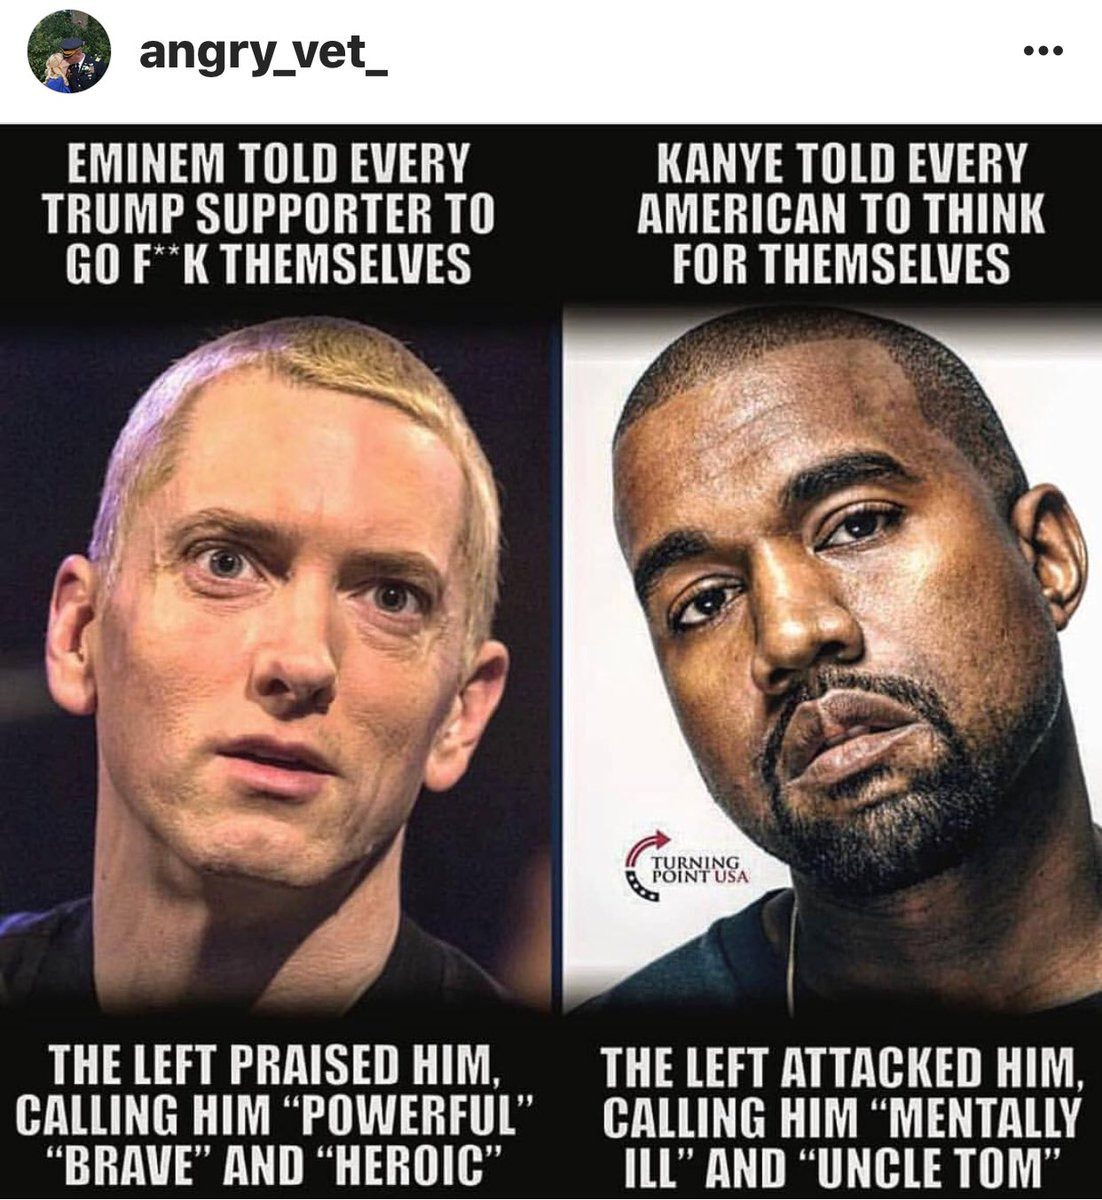 democratic hypocrisy - angry_vet_ Eminem Told Every Trump Supporter To Go FK Themselves Kanye Told Every American To Think For Themselves Turning Point Usa The Left Praised Him, Calling Him Powerful "Brave And Heroic" The Left Attacked Him, Calling Him Me